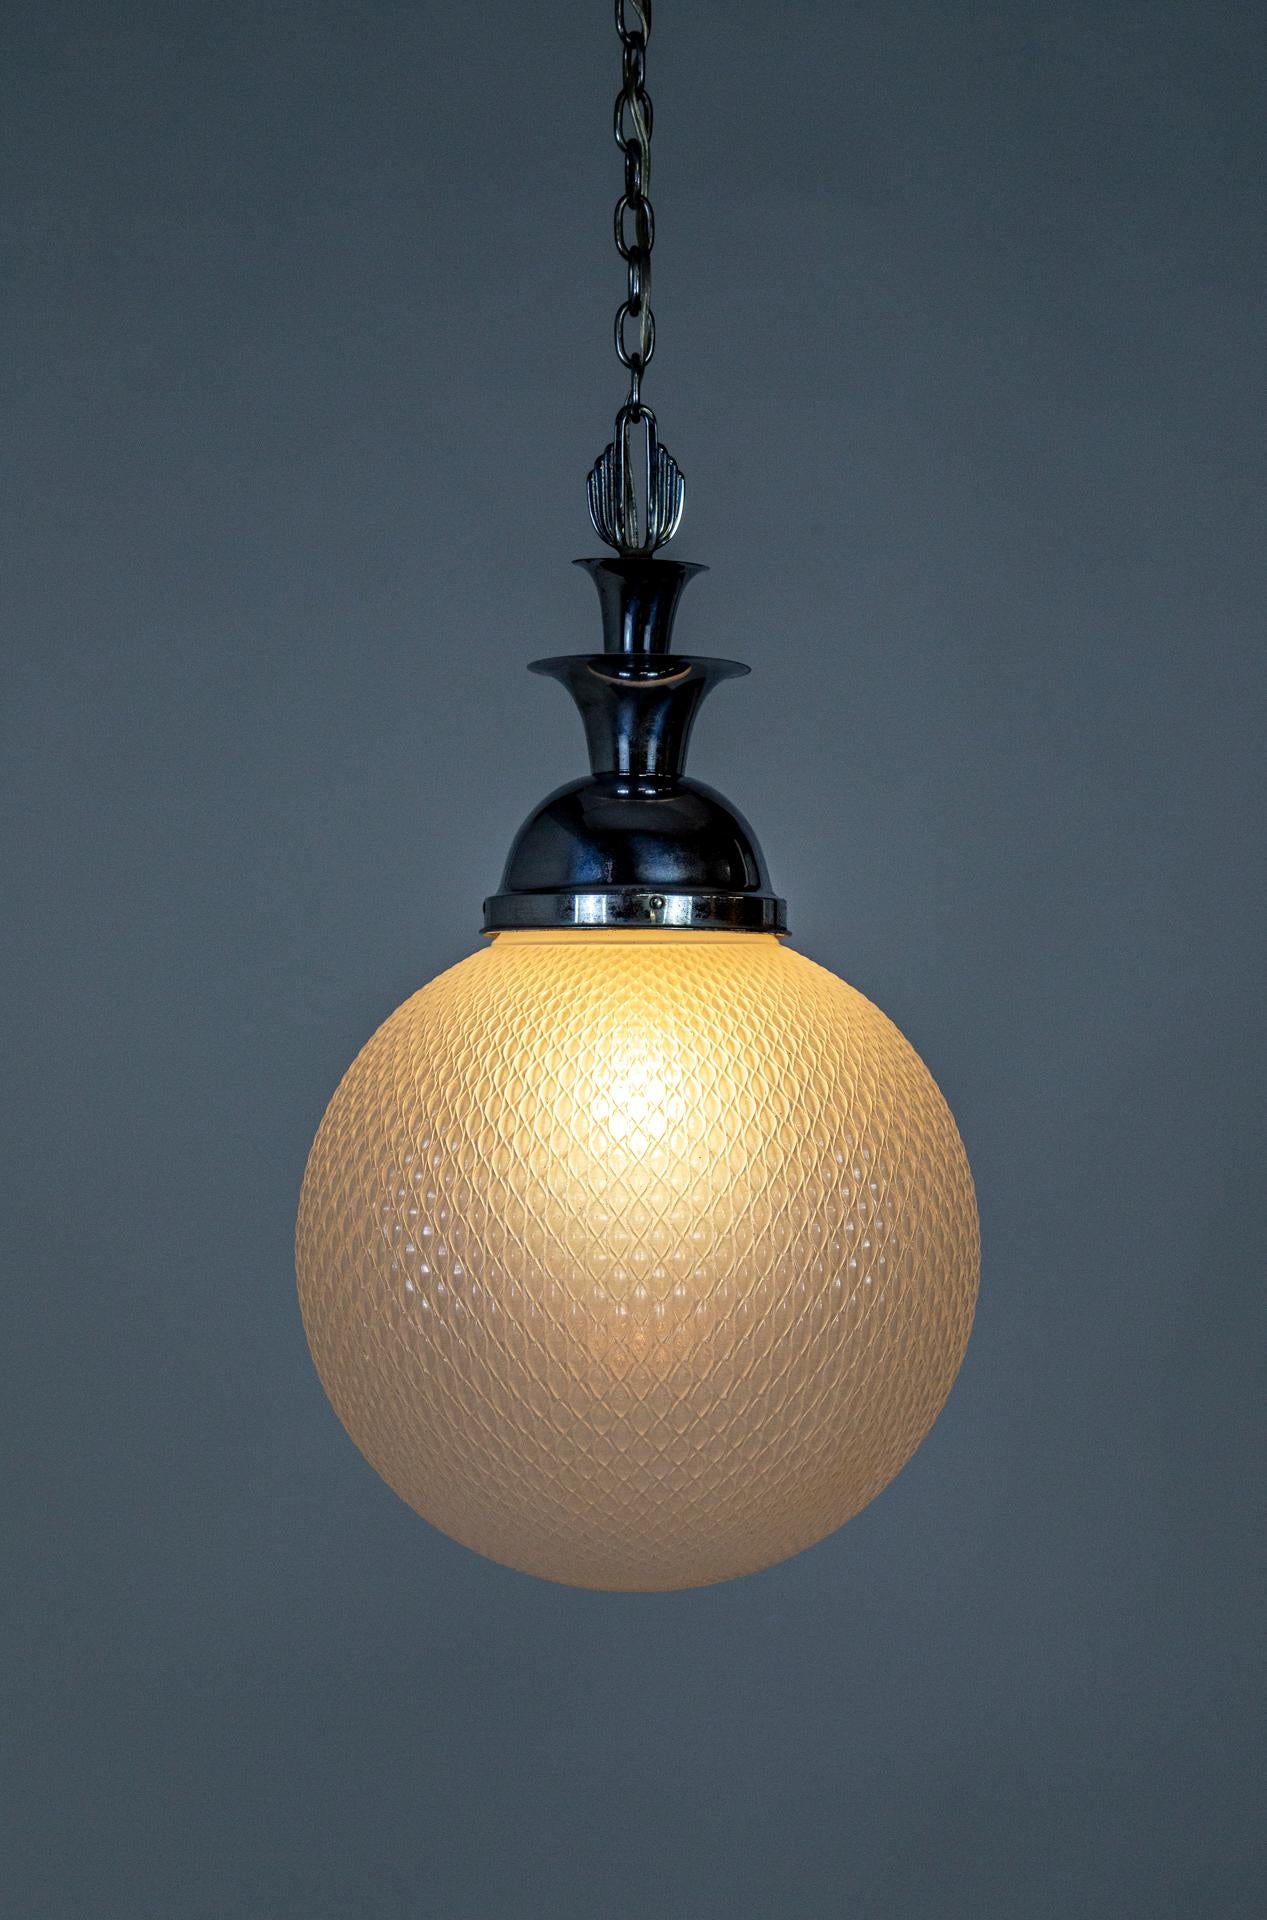 A large, hanging light fixture from the Art Deco era with a trumpeting, chrome shade holder in the iconic style. The opaline glass globe has a lovely texture with beautiful light diffusion. Original, steel hardware. Newly rewired. One medium base